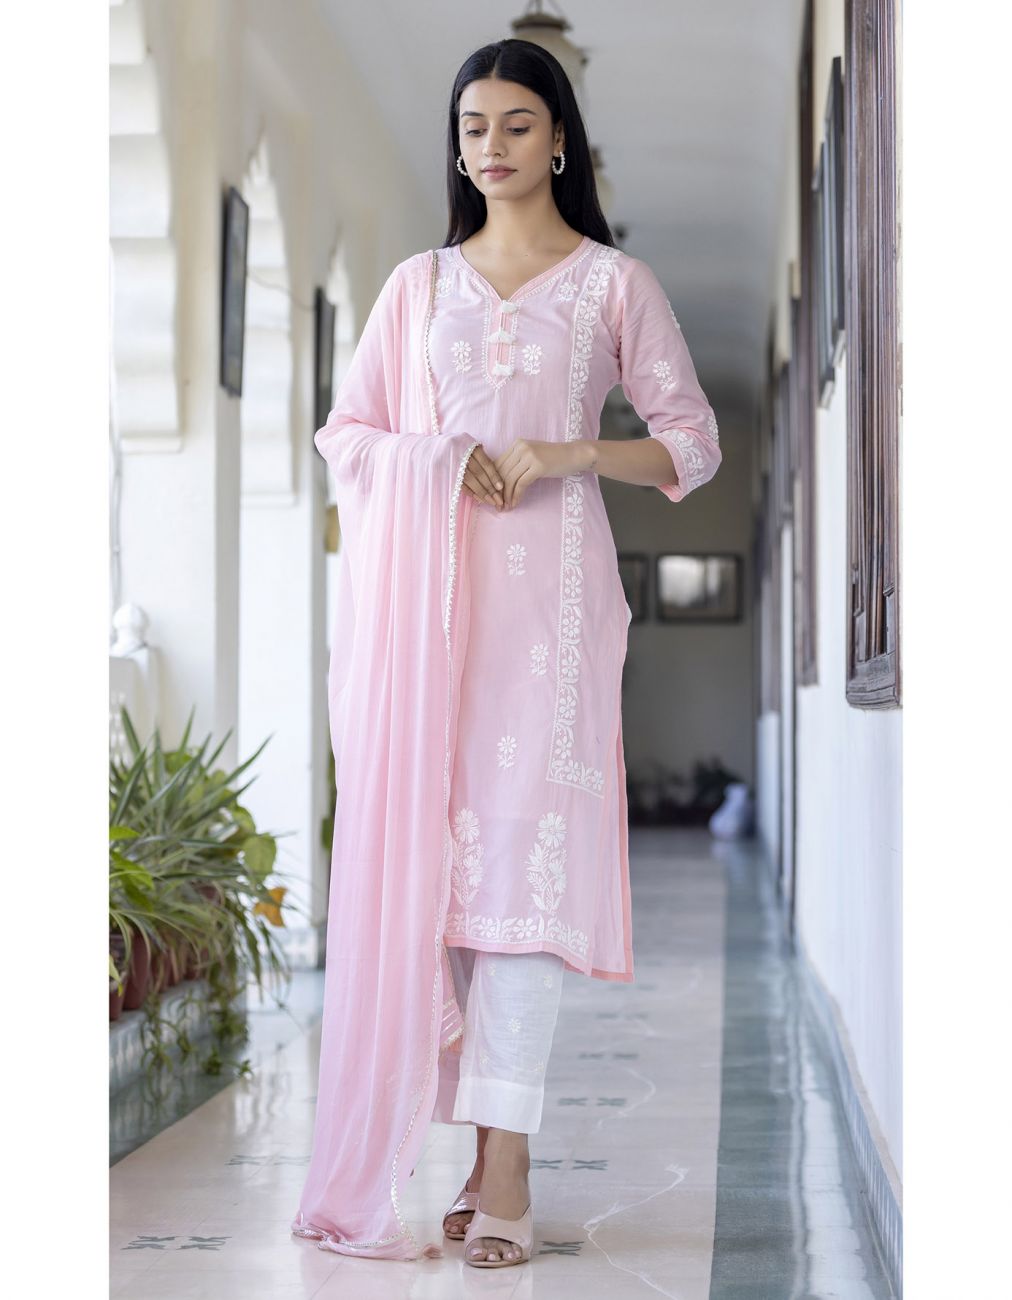 Readymade-salwar-suits, Fully-stitched-salwar-suits, Readymade-salwar-suit-wholesale,  Salwar-suit-online-shopping, Readymade-salwar-suit-uk,  Punjabi-readymade-salwar-suit, Party-wear-readymade-salwar-suit